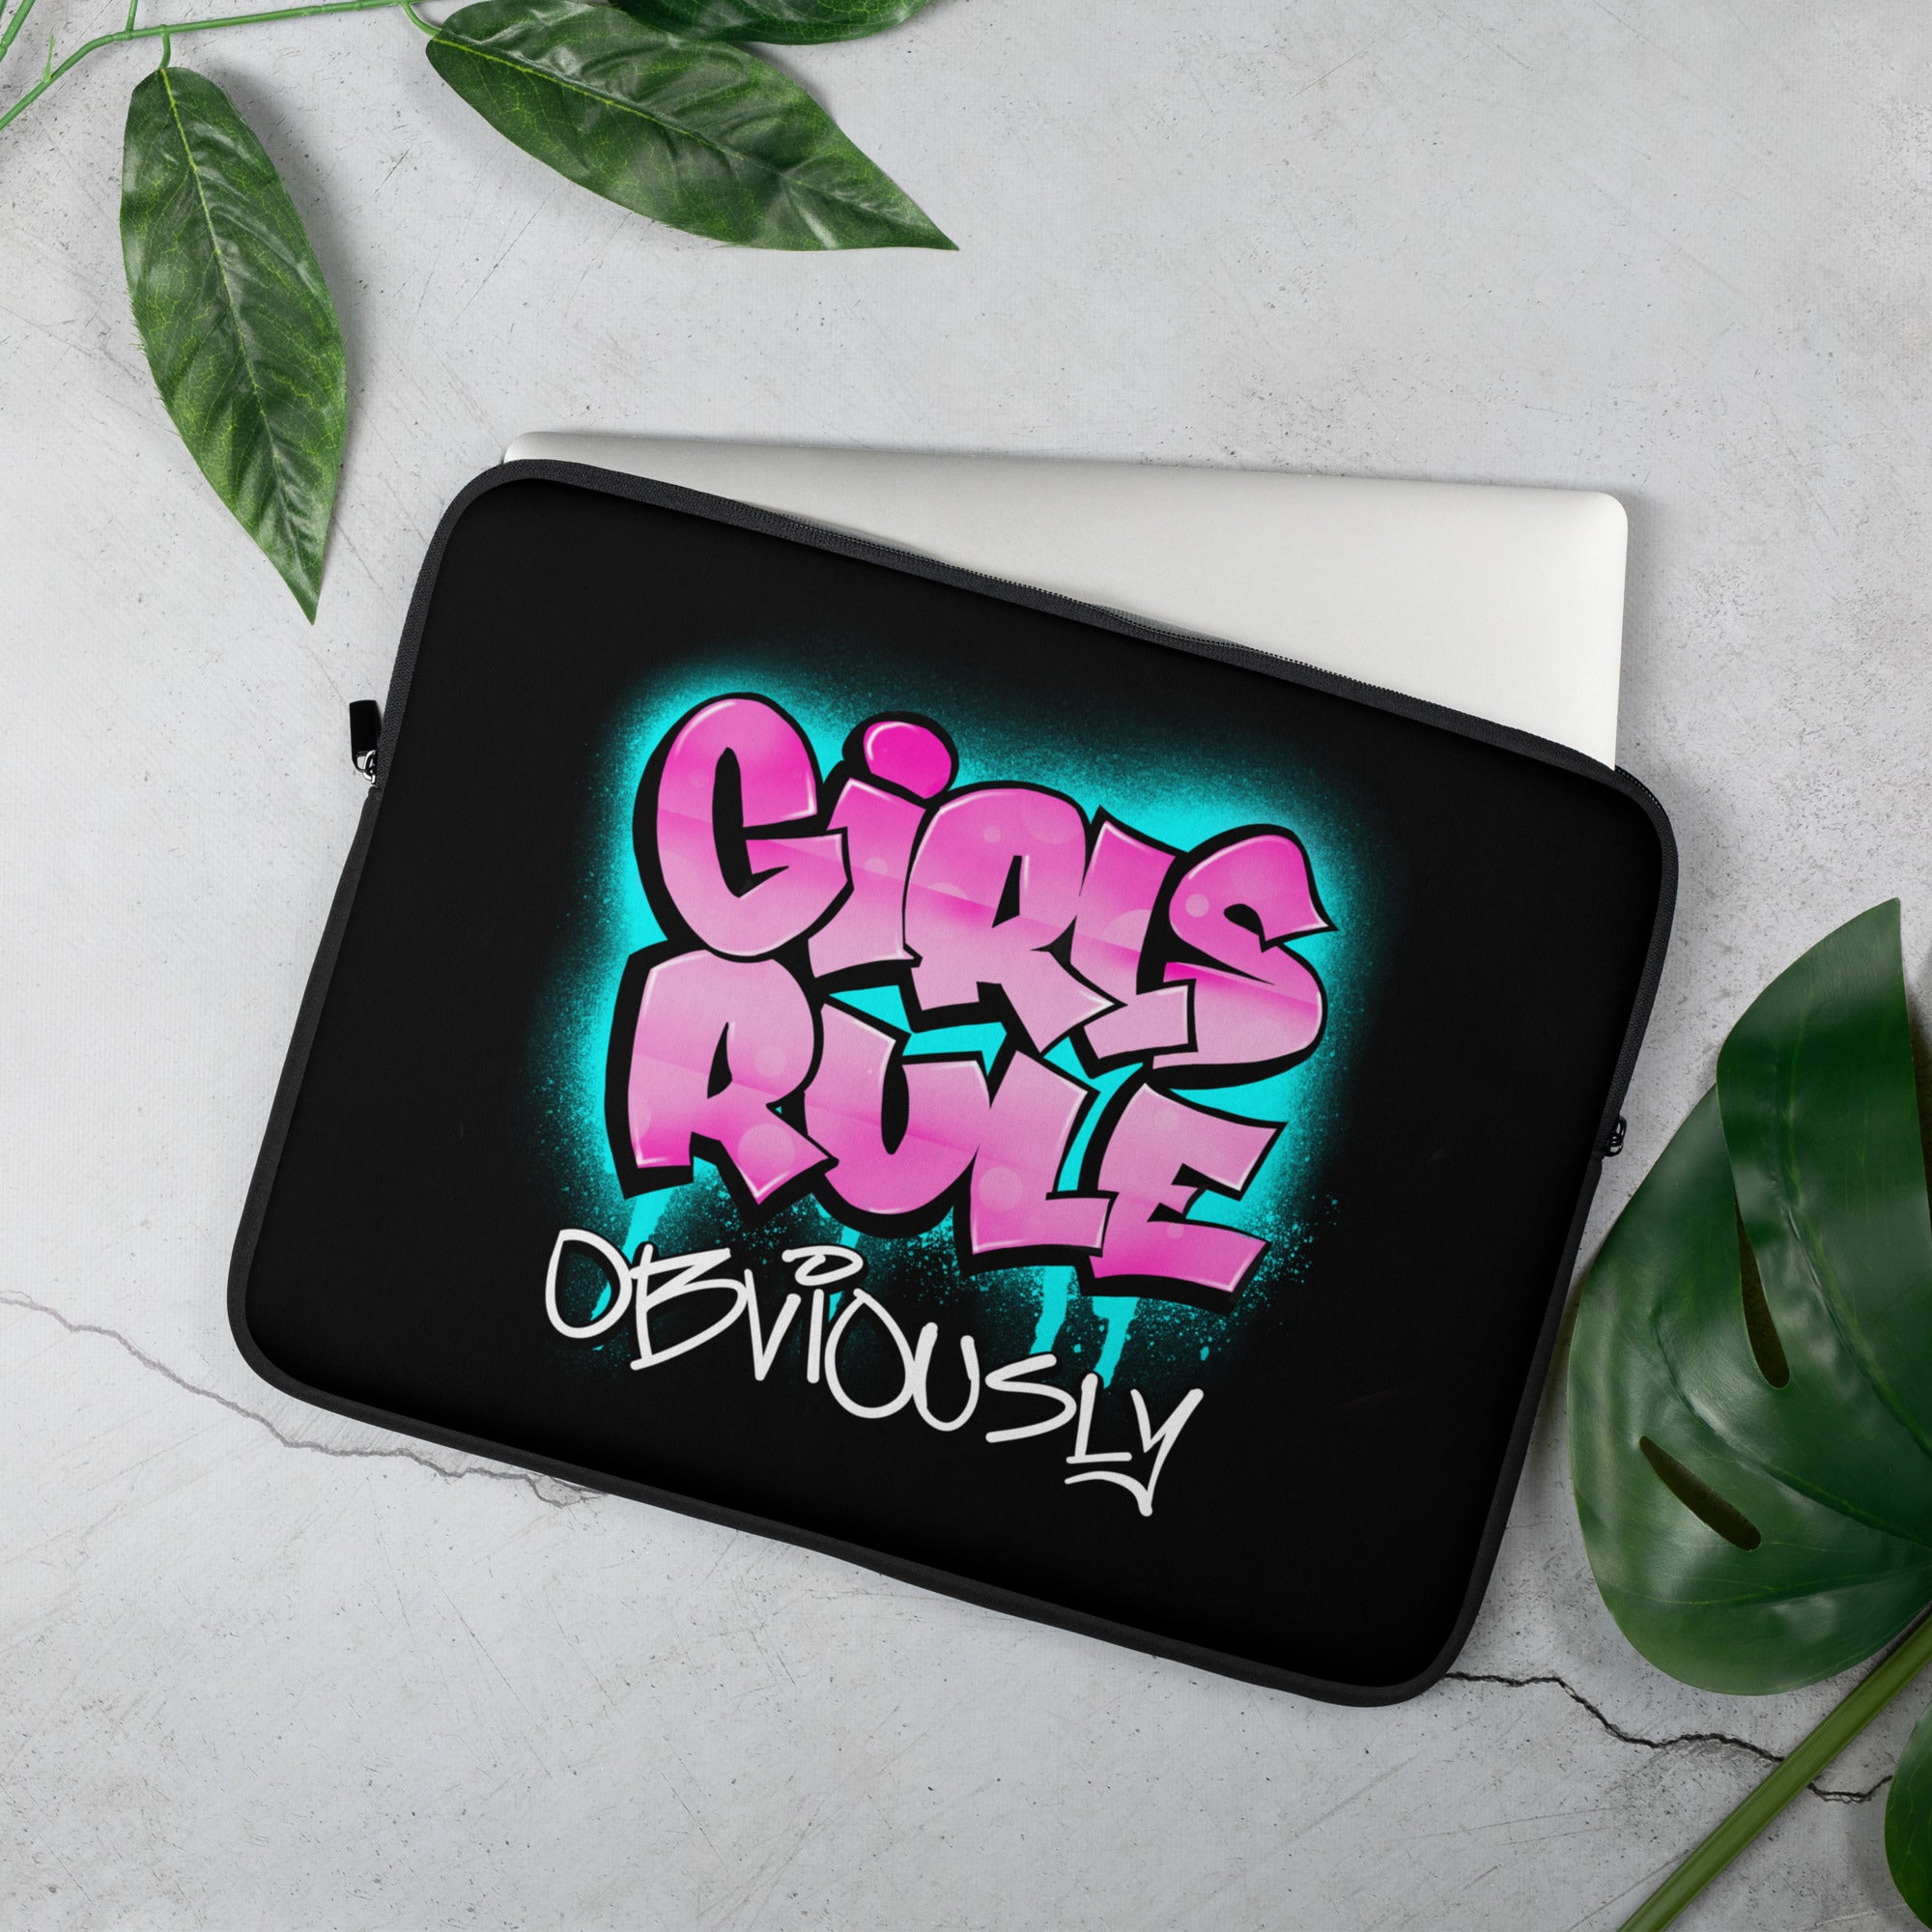 GIRLS RULE OBVIOUSLY - Laptop Sleeve